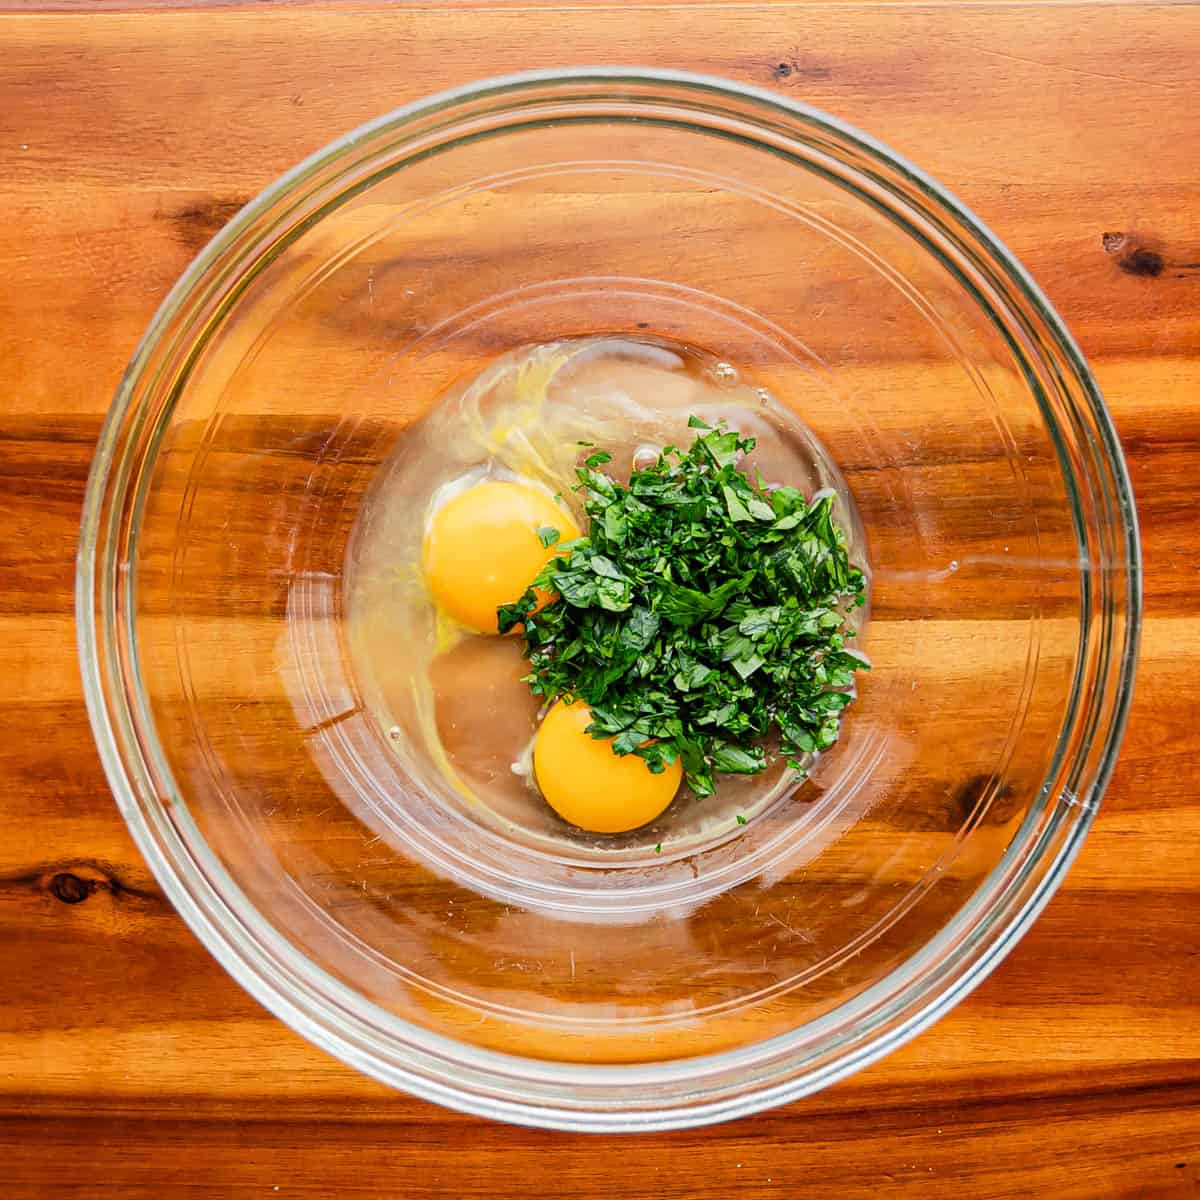 In a large baking dish or mixing bowl, beat eggs and incorporate parsley.